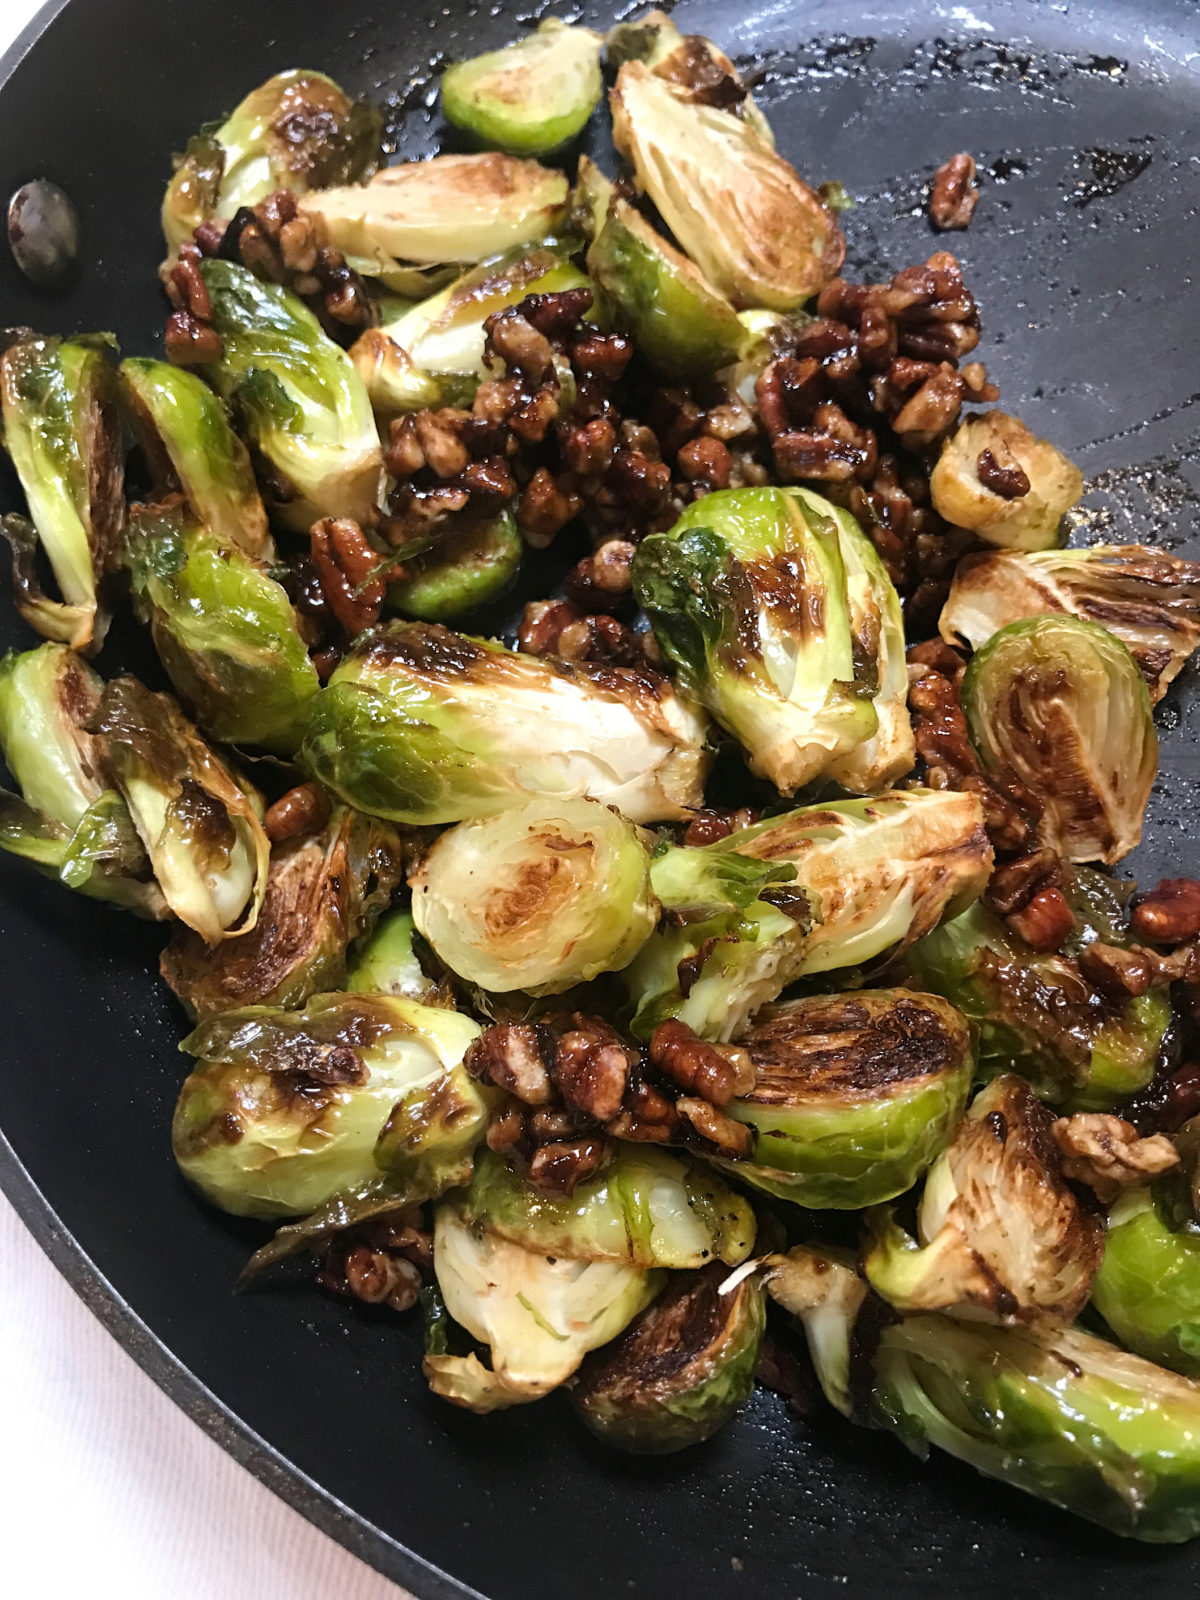 Balsamic glazed brussel sprouts